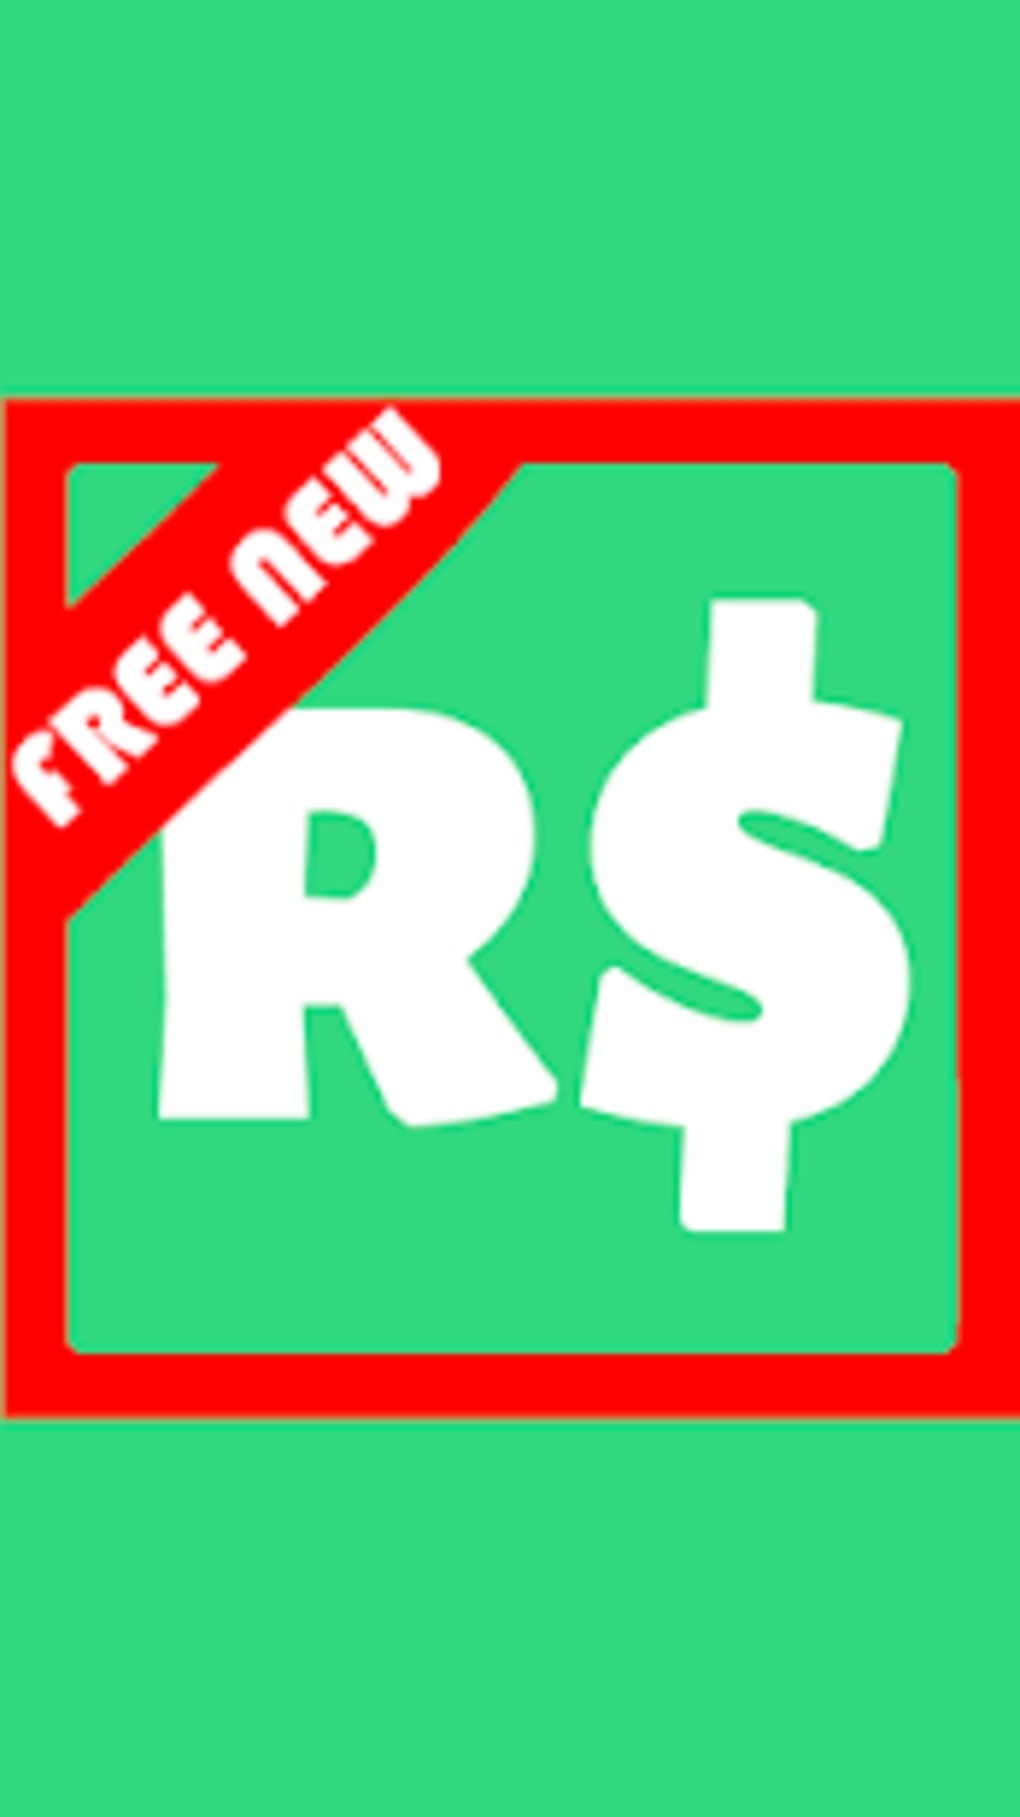 How To Get More Robux For Free In Roblox